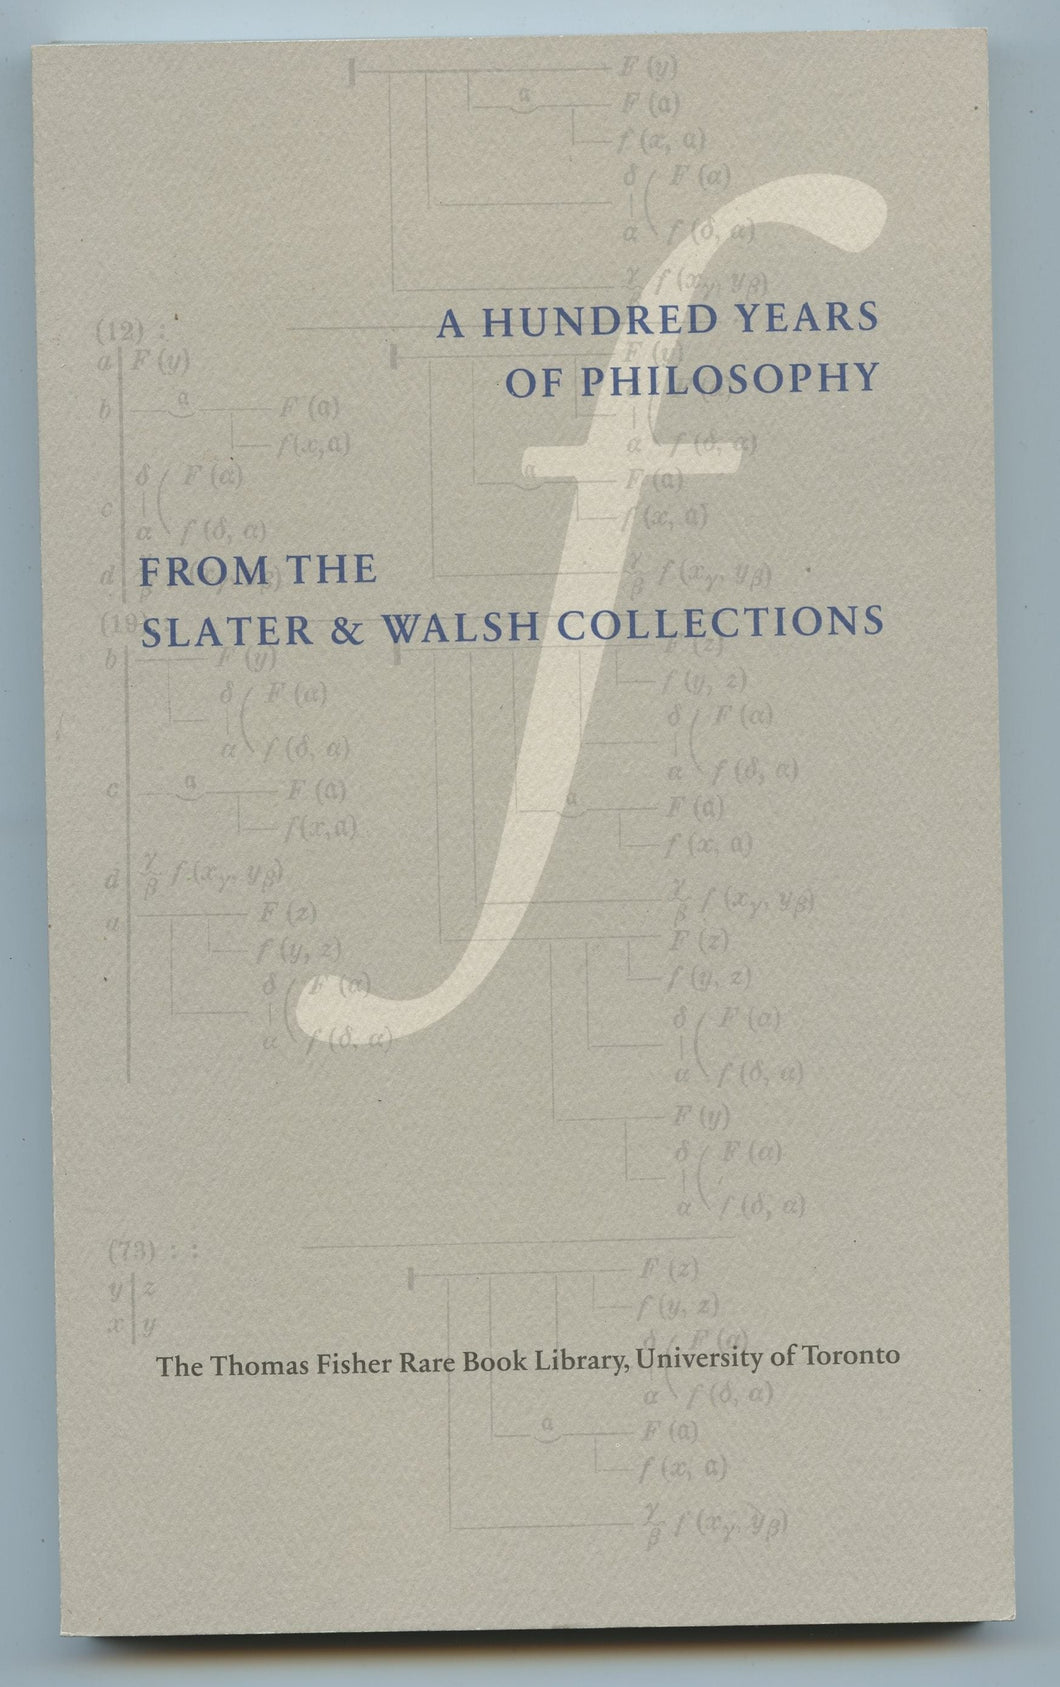 A Hundred Years of Philosophy from the Slater & Walsh Collections